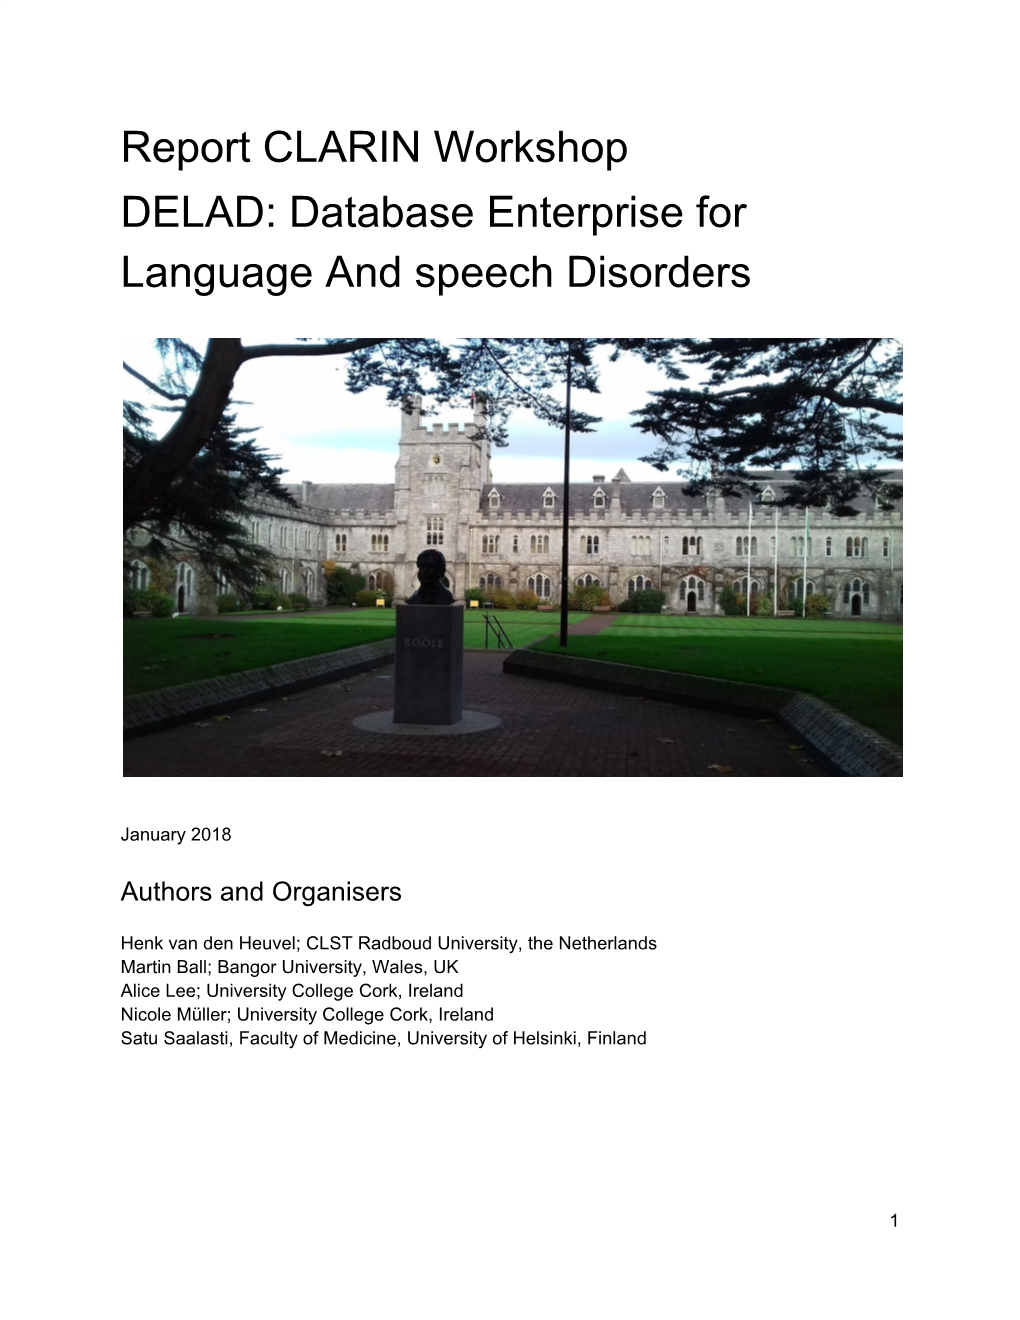 Report CLARIN Workshop DELAD: Database Enterprise for Language and Speech Disorders